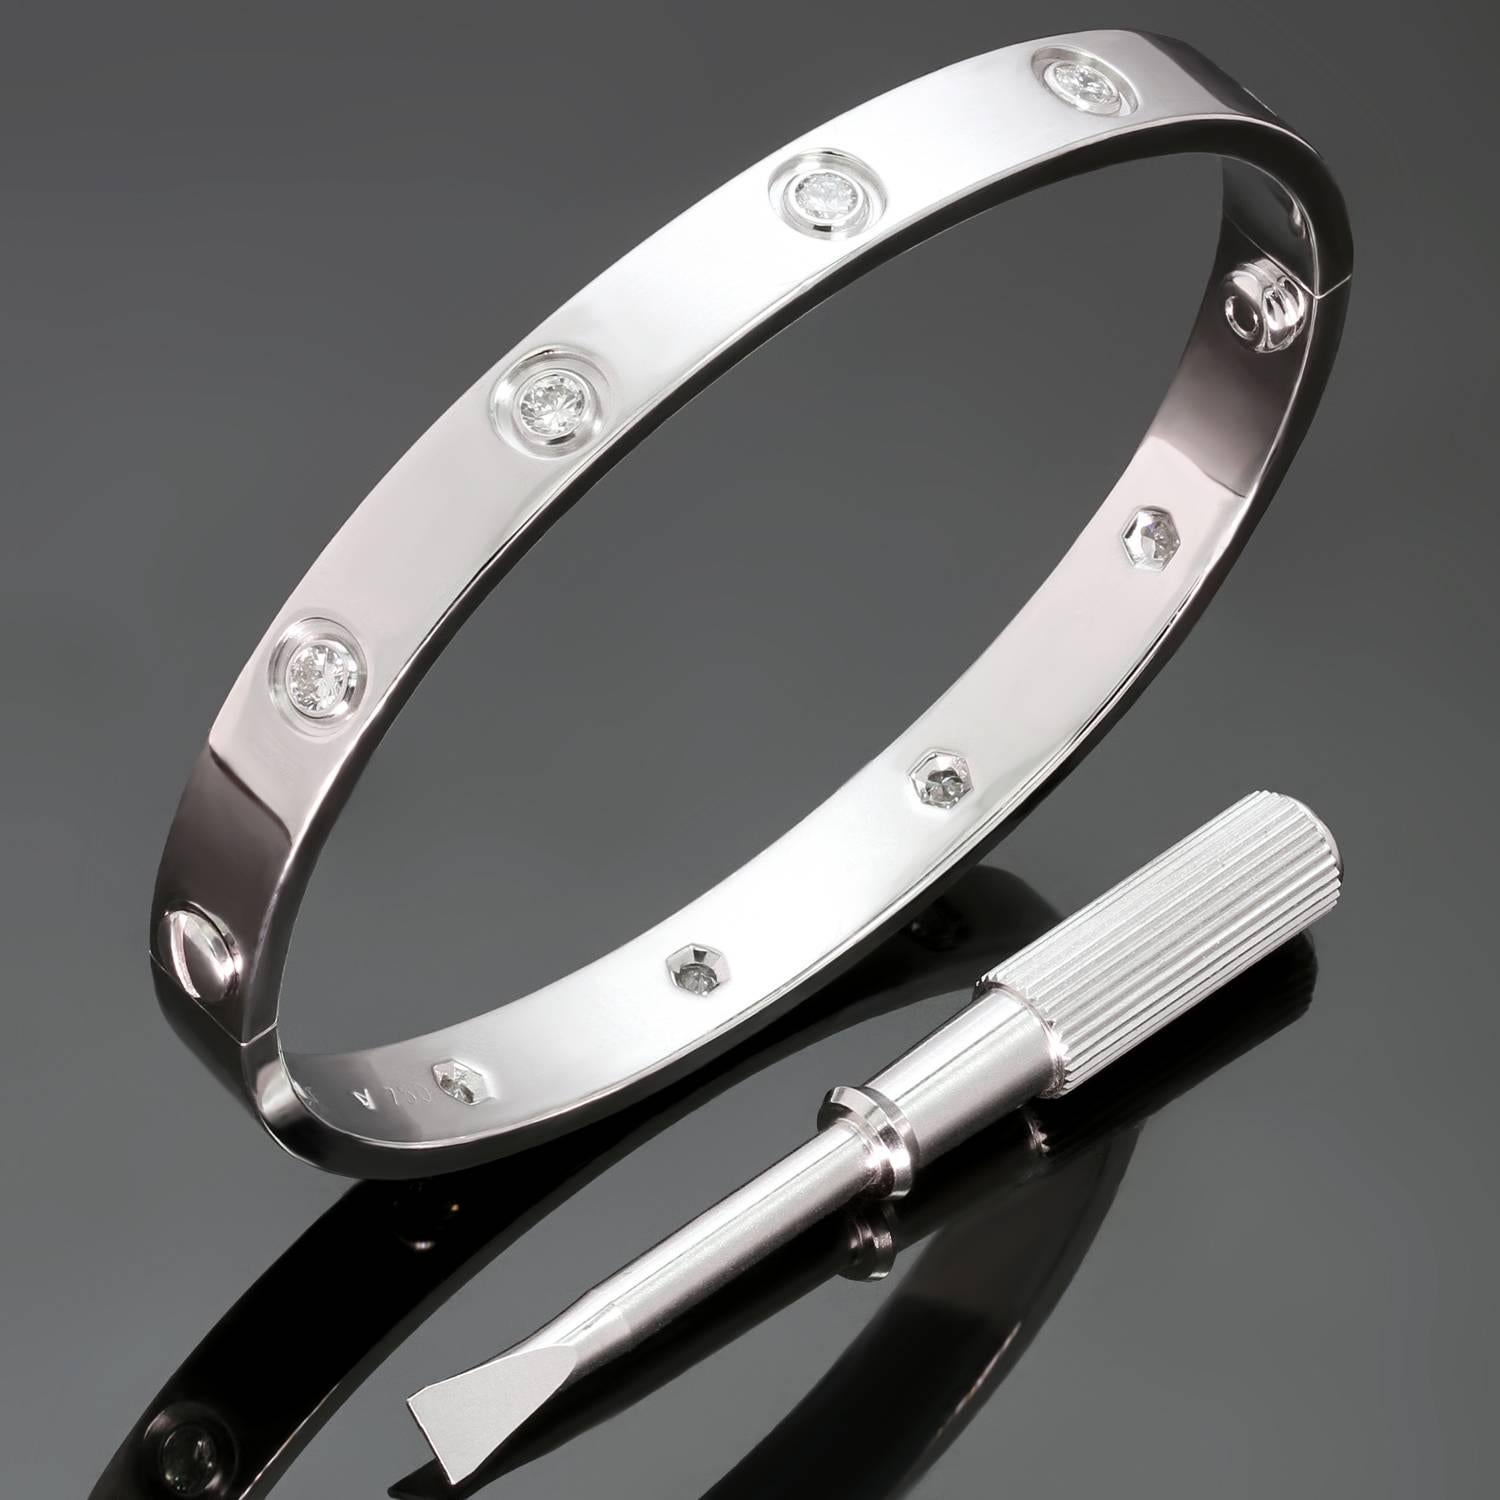 This iconic and timeless bracelet from Cartier's Love collection is finely crafted in 18k white gold and set with 10 brilliant-cut round diamonds. Completed with the original Cartier screwdriver. This bangle is a size 17. Made in France circa 1997.